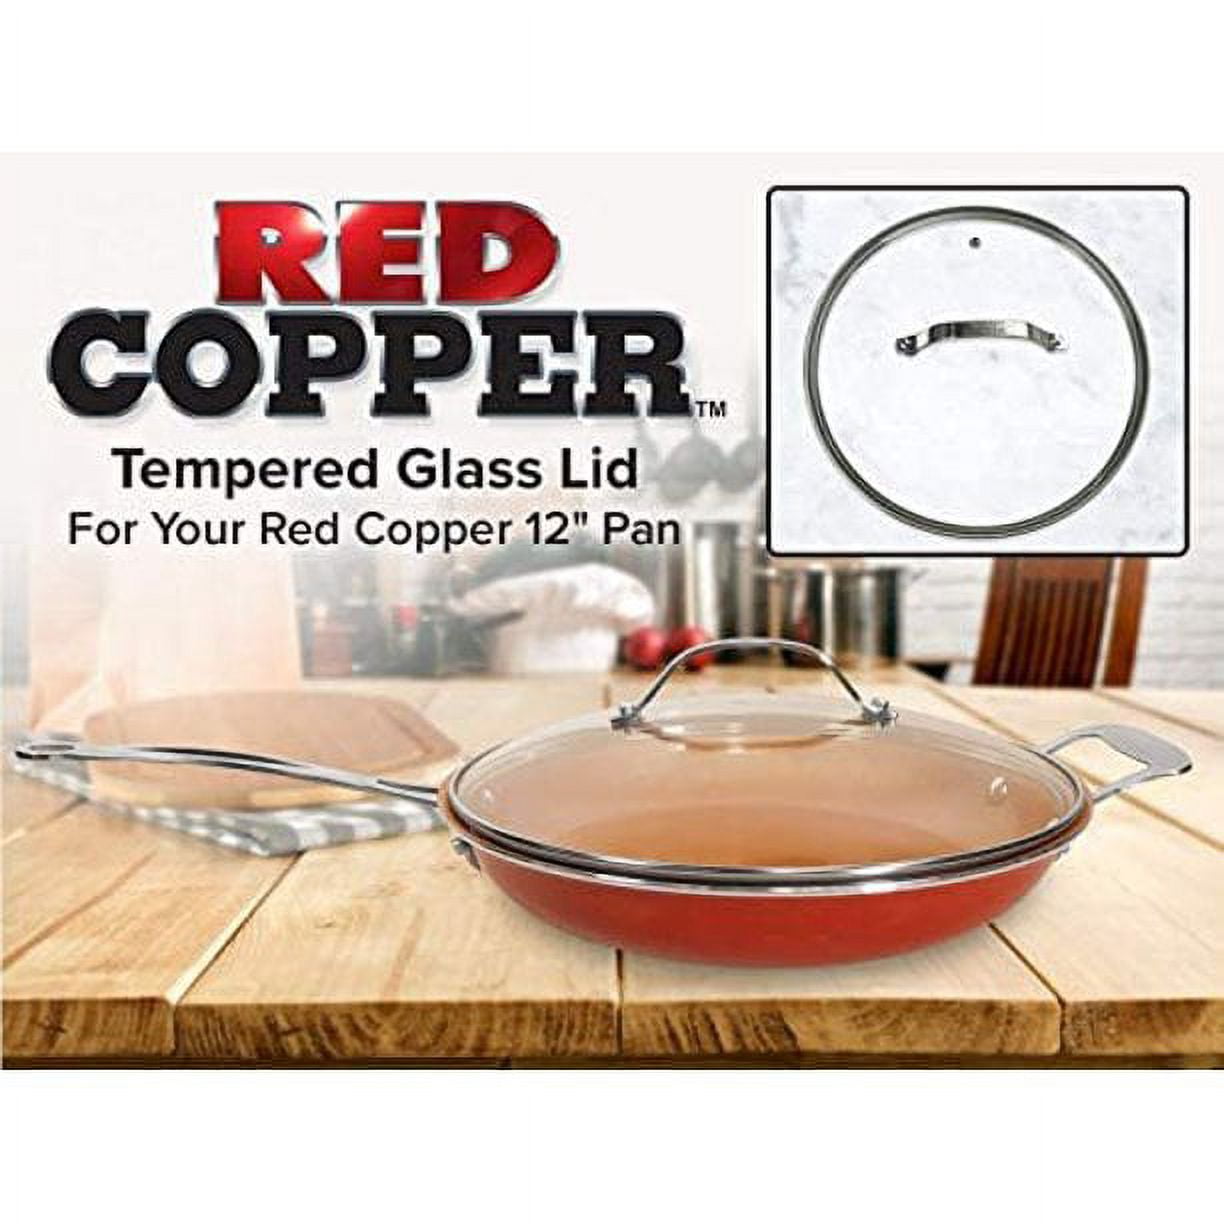 Red Copper 12-inch Square Pan As Seen on TV